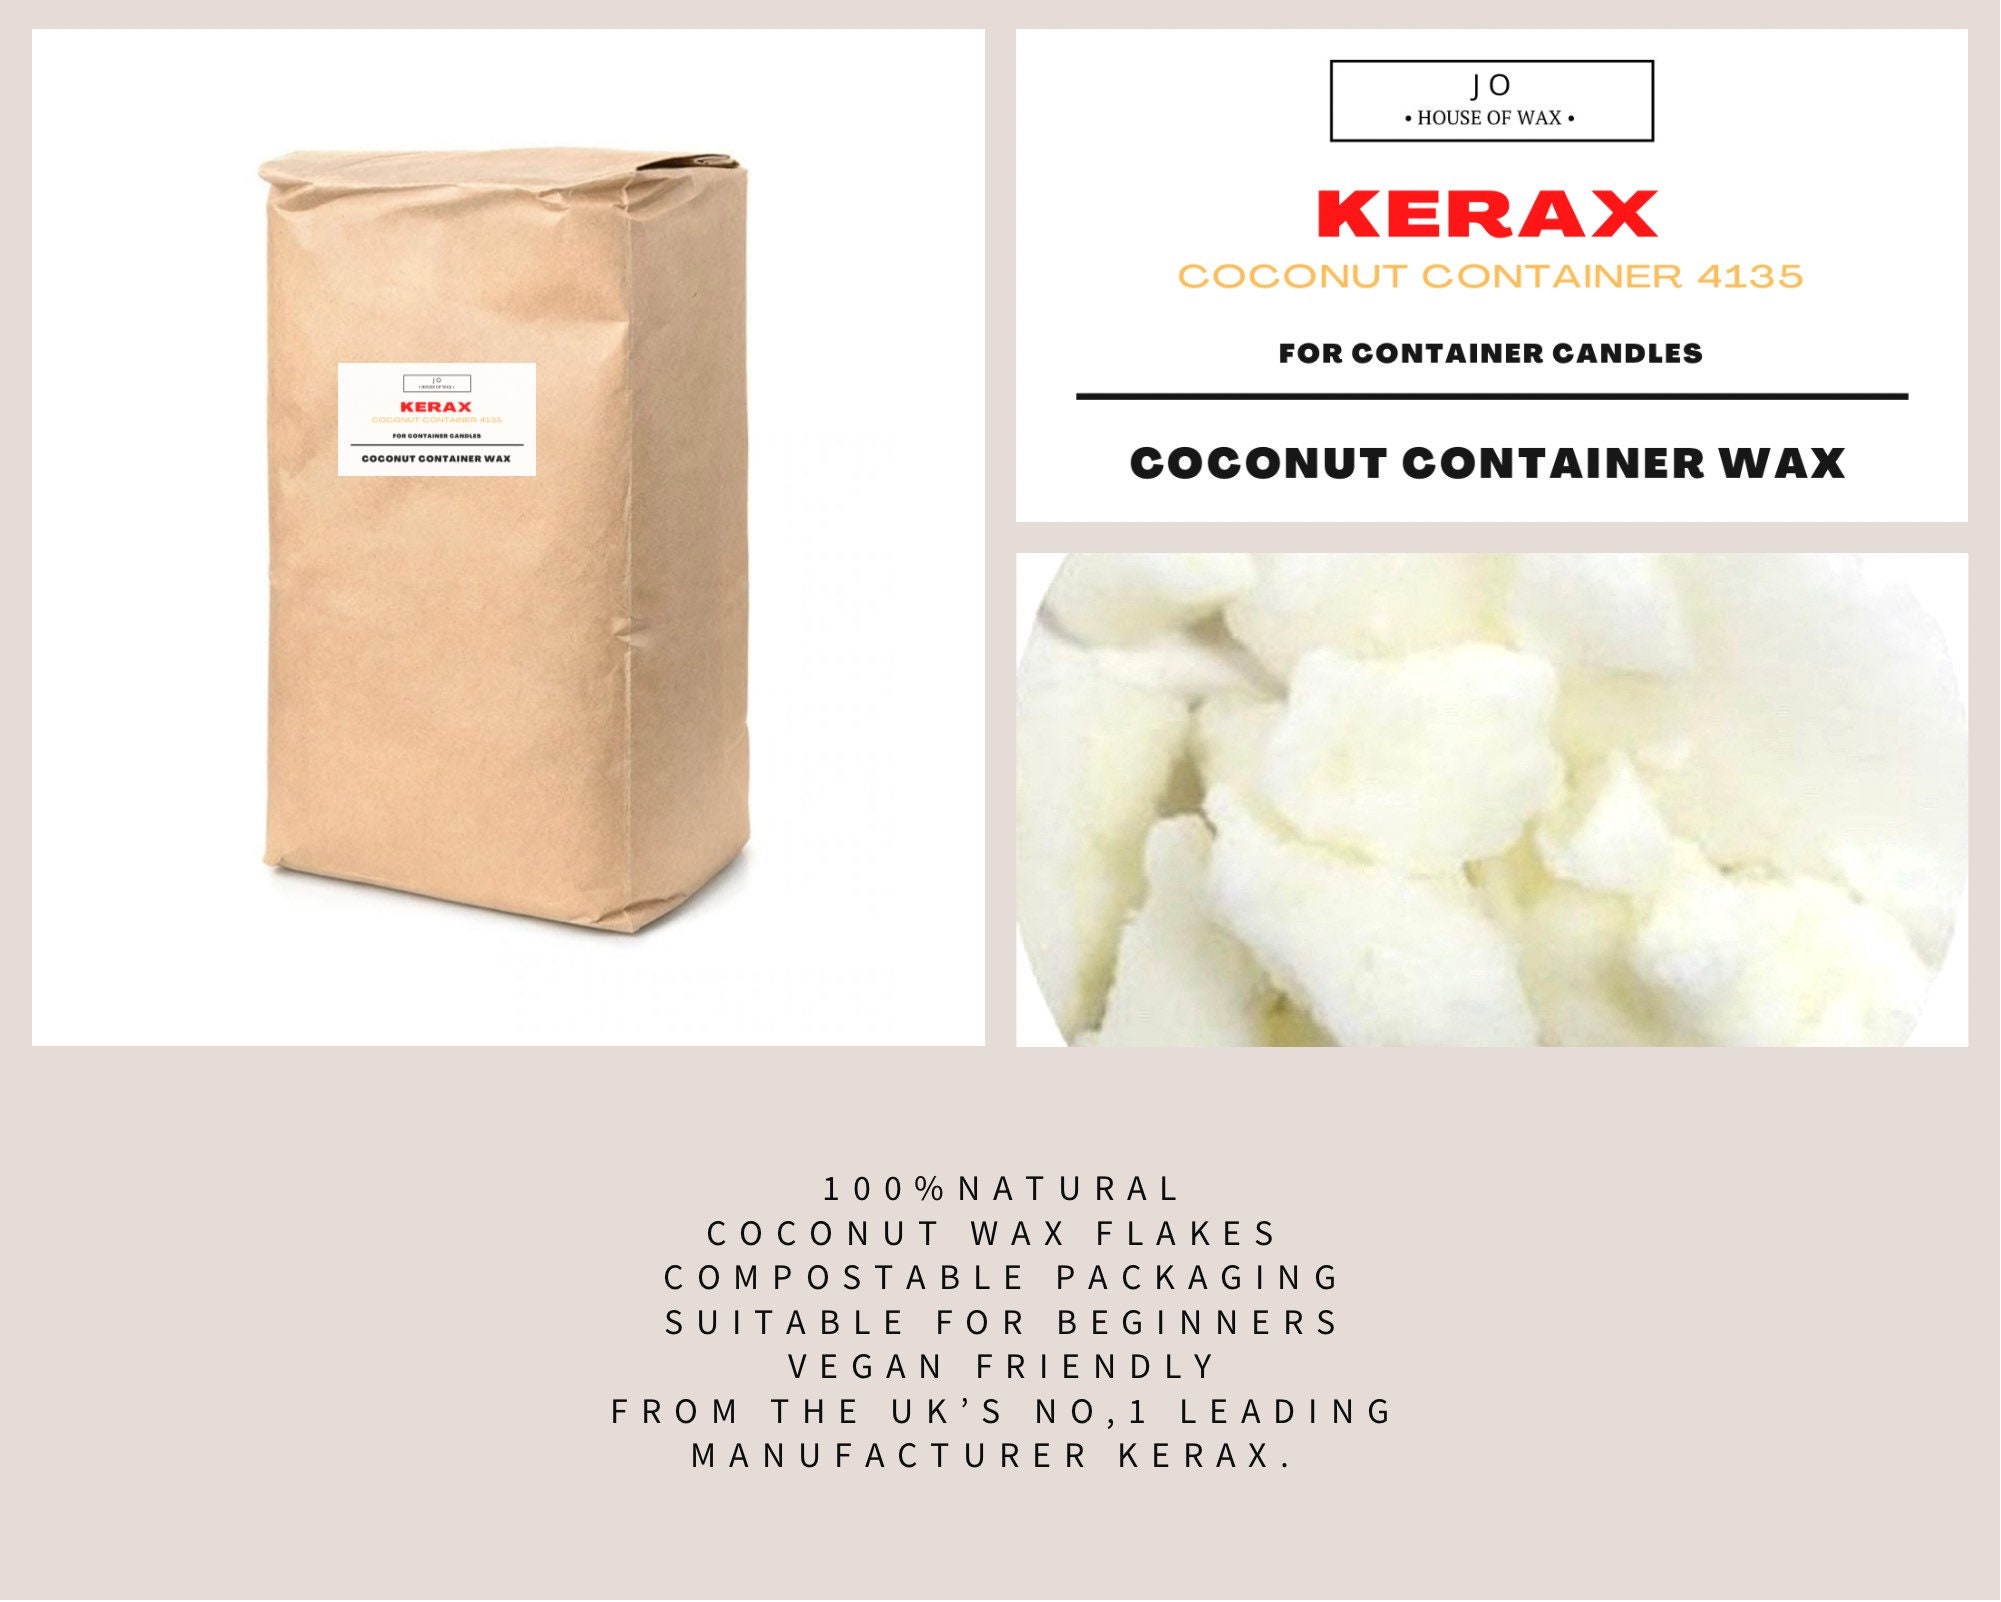 White Beeswax for Candle Making - Wax Flakes 500g - Melting point